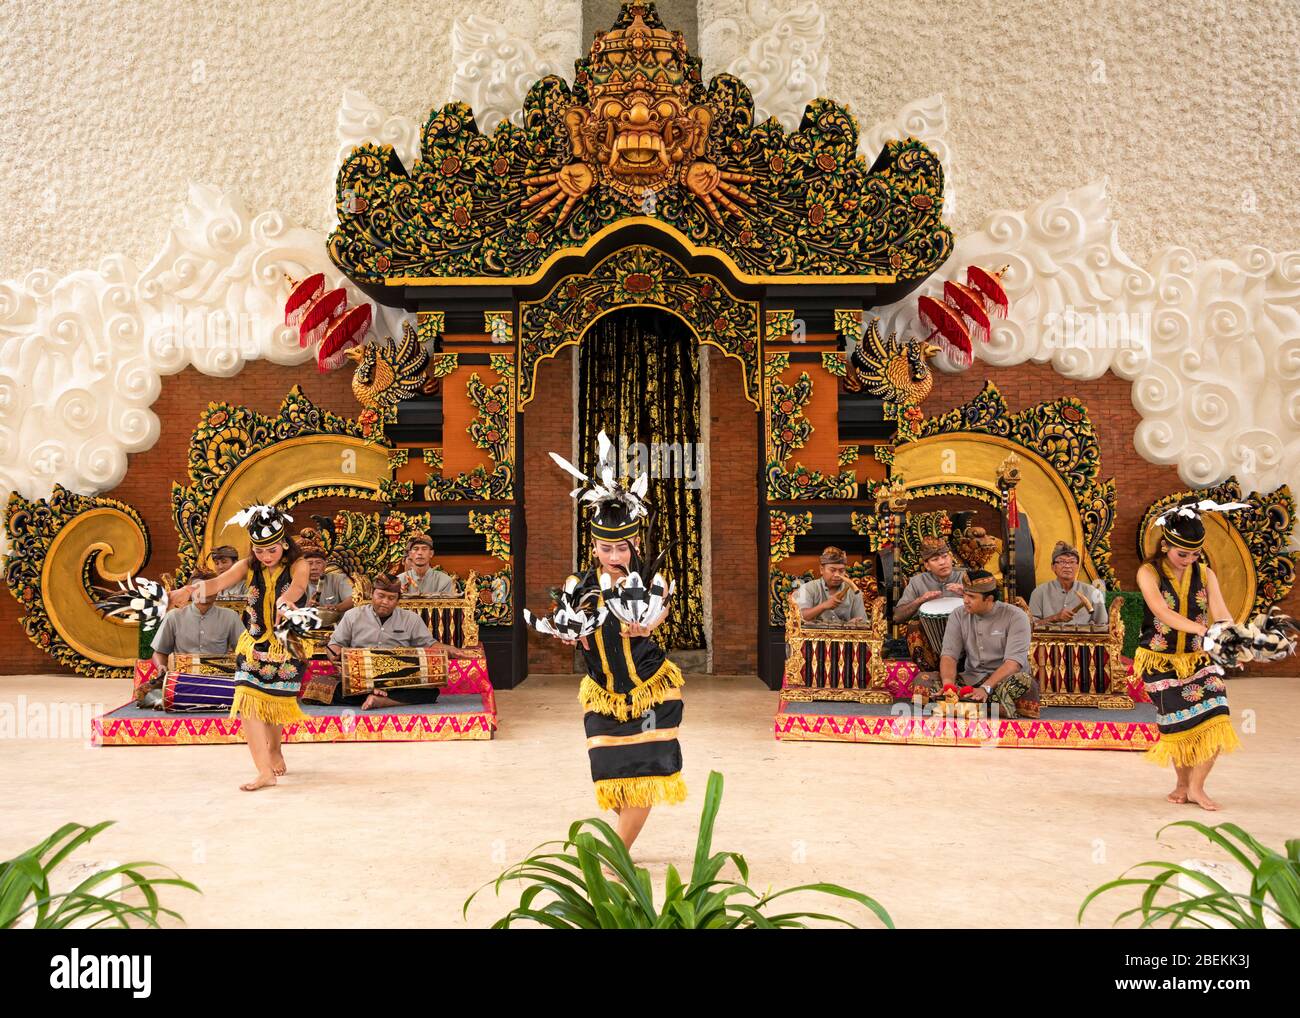 Horizontal view of traditional tribal dancers in Bali, Indonesia. Stock Photo